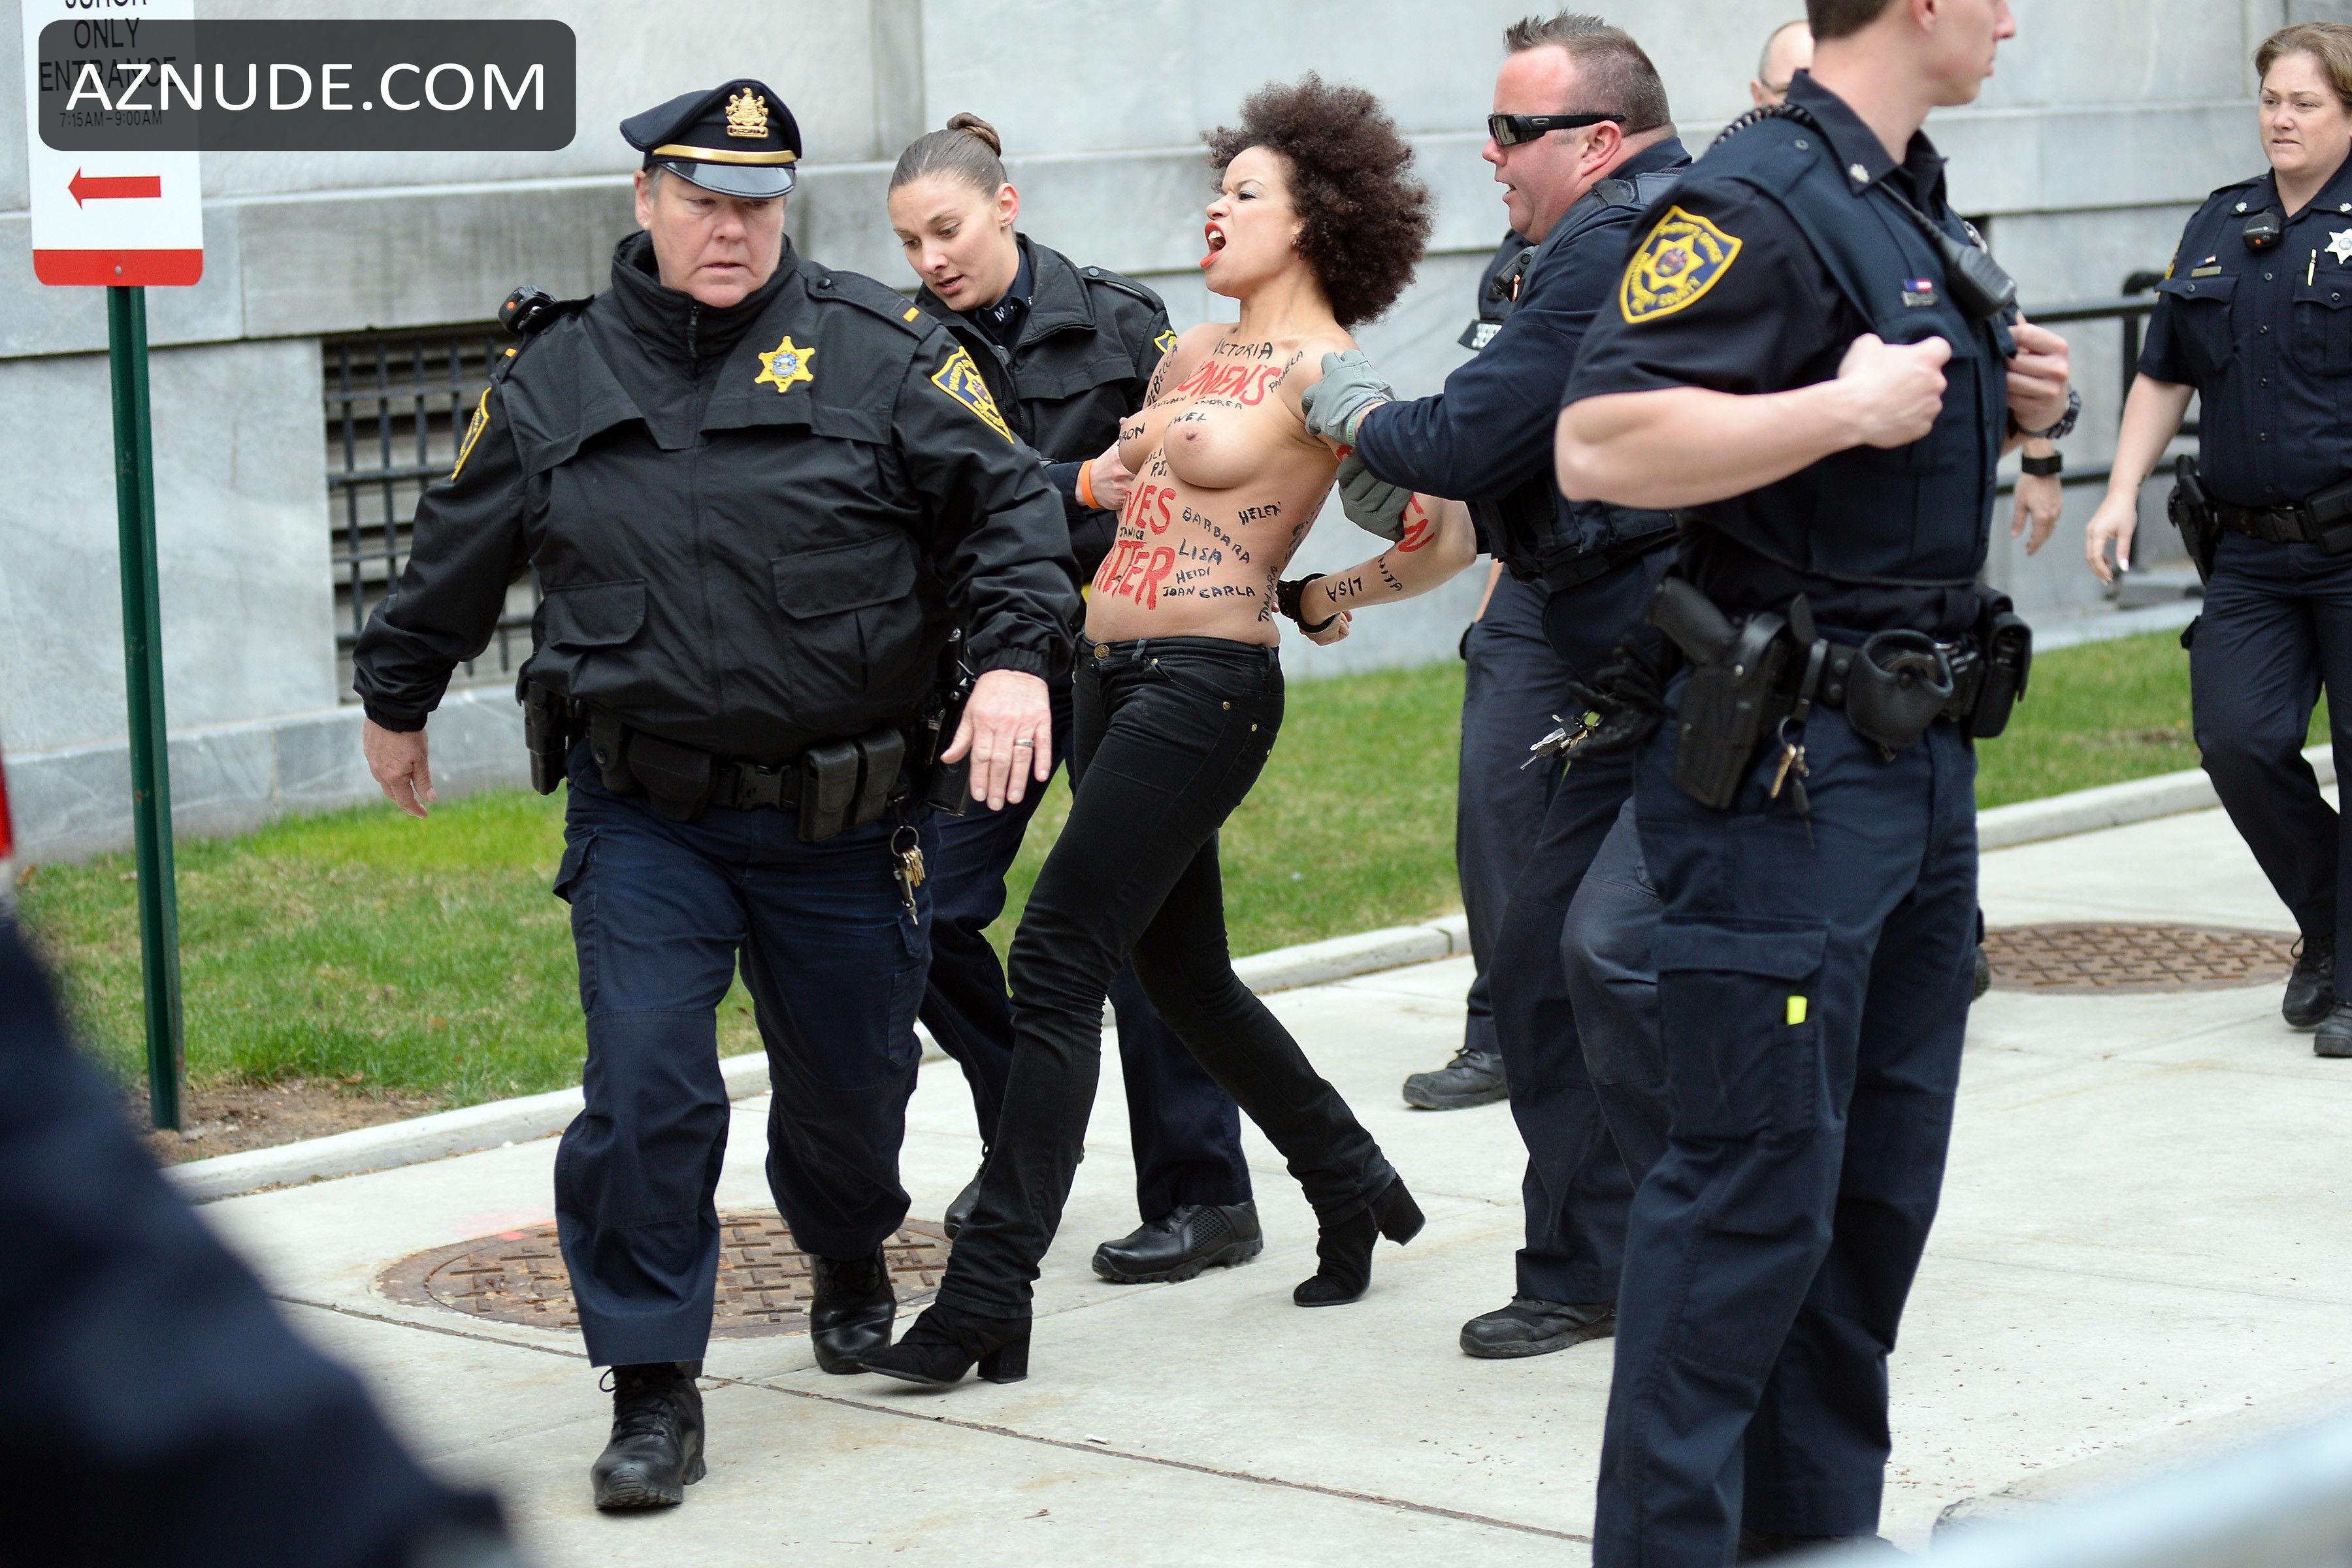 Rochelle nude nicolle Topless protester